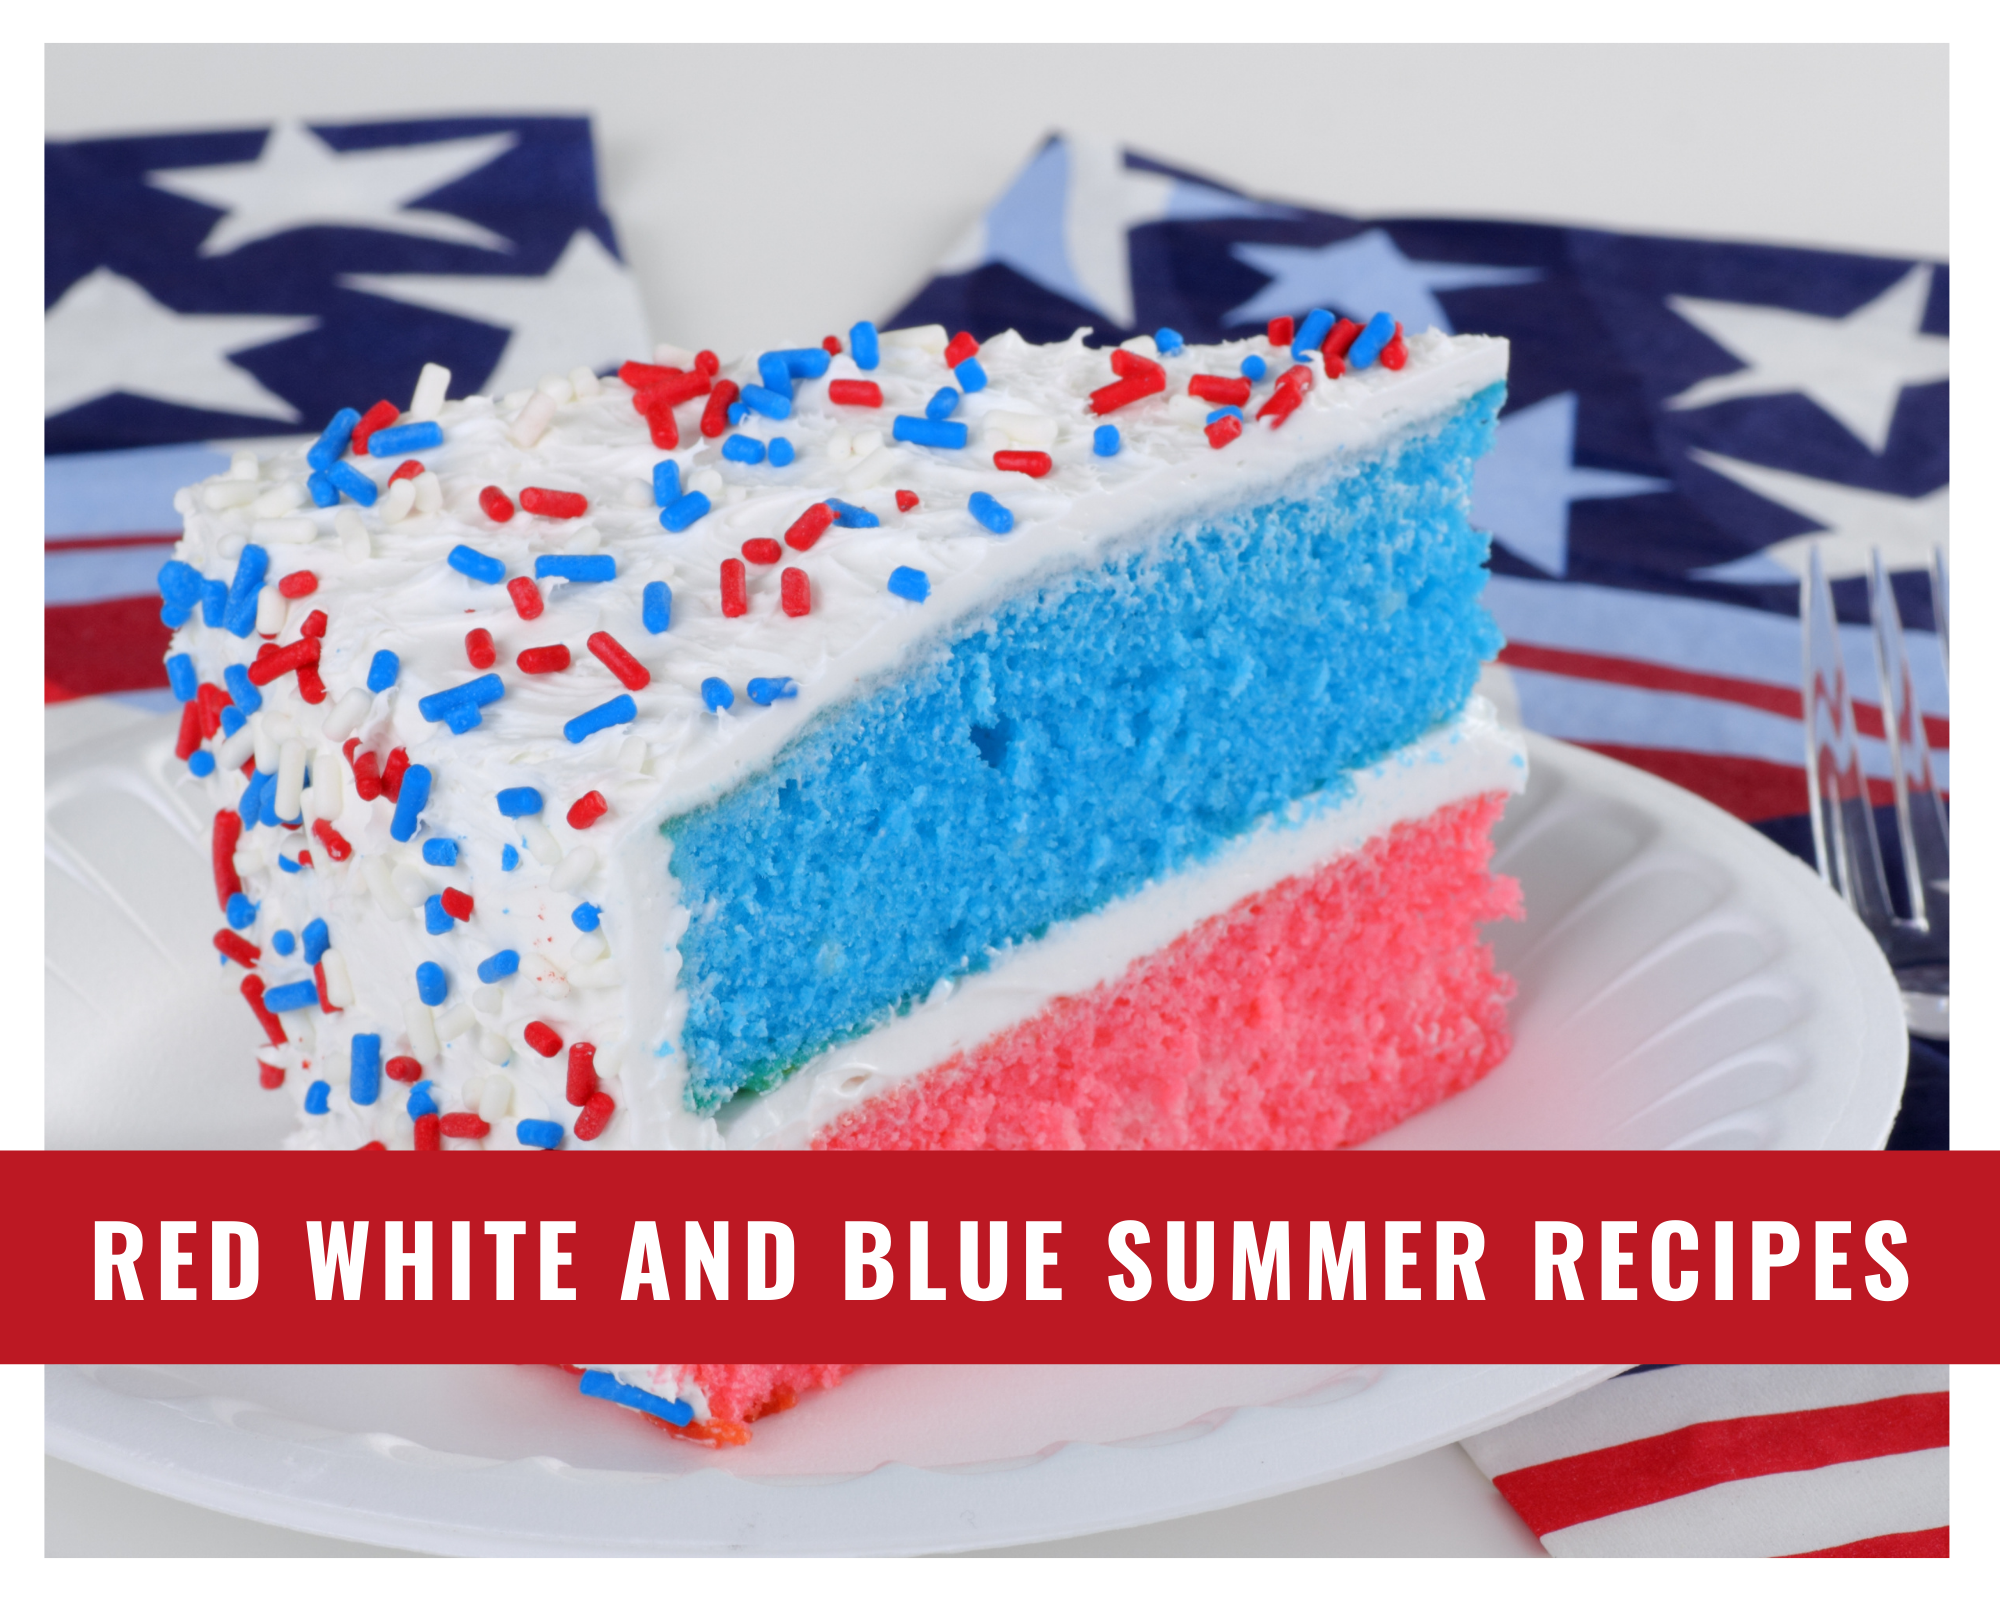 Red White and Blue Summer Recipes